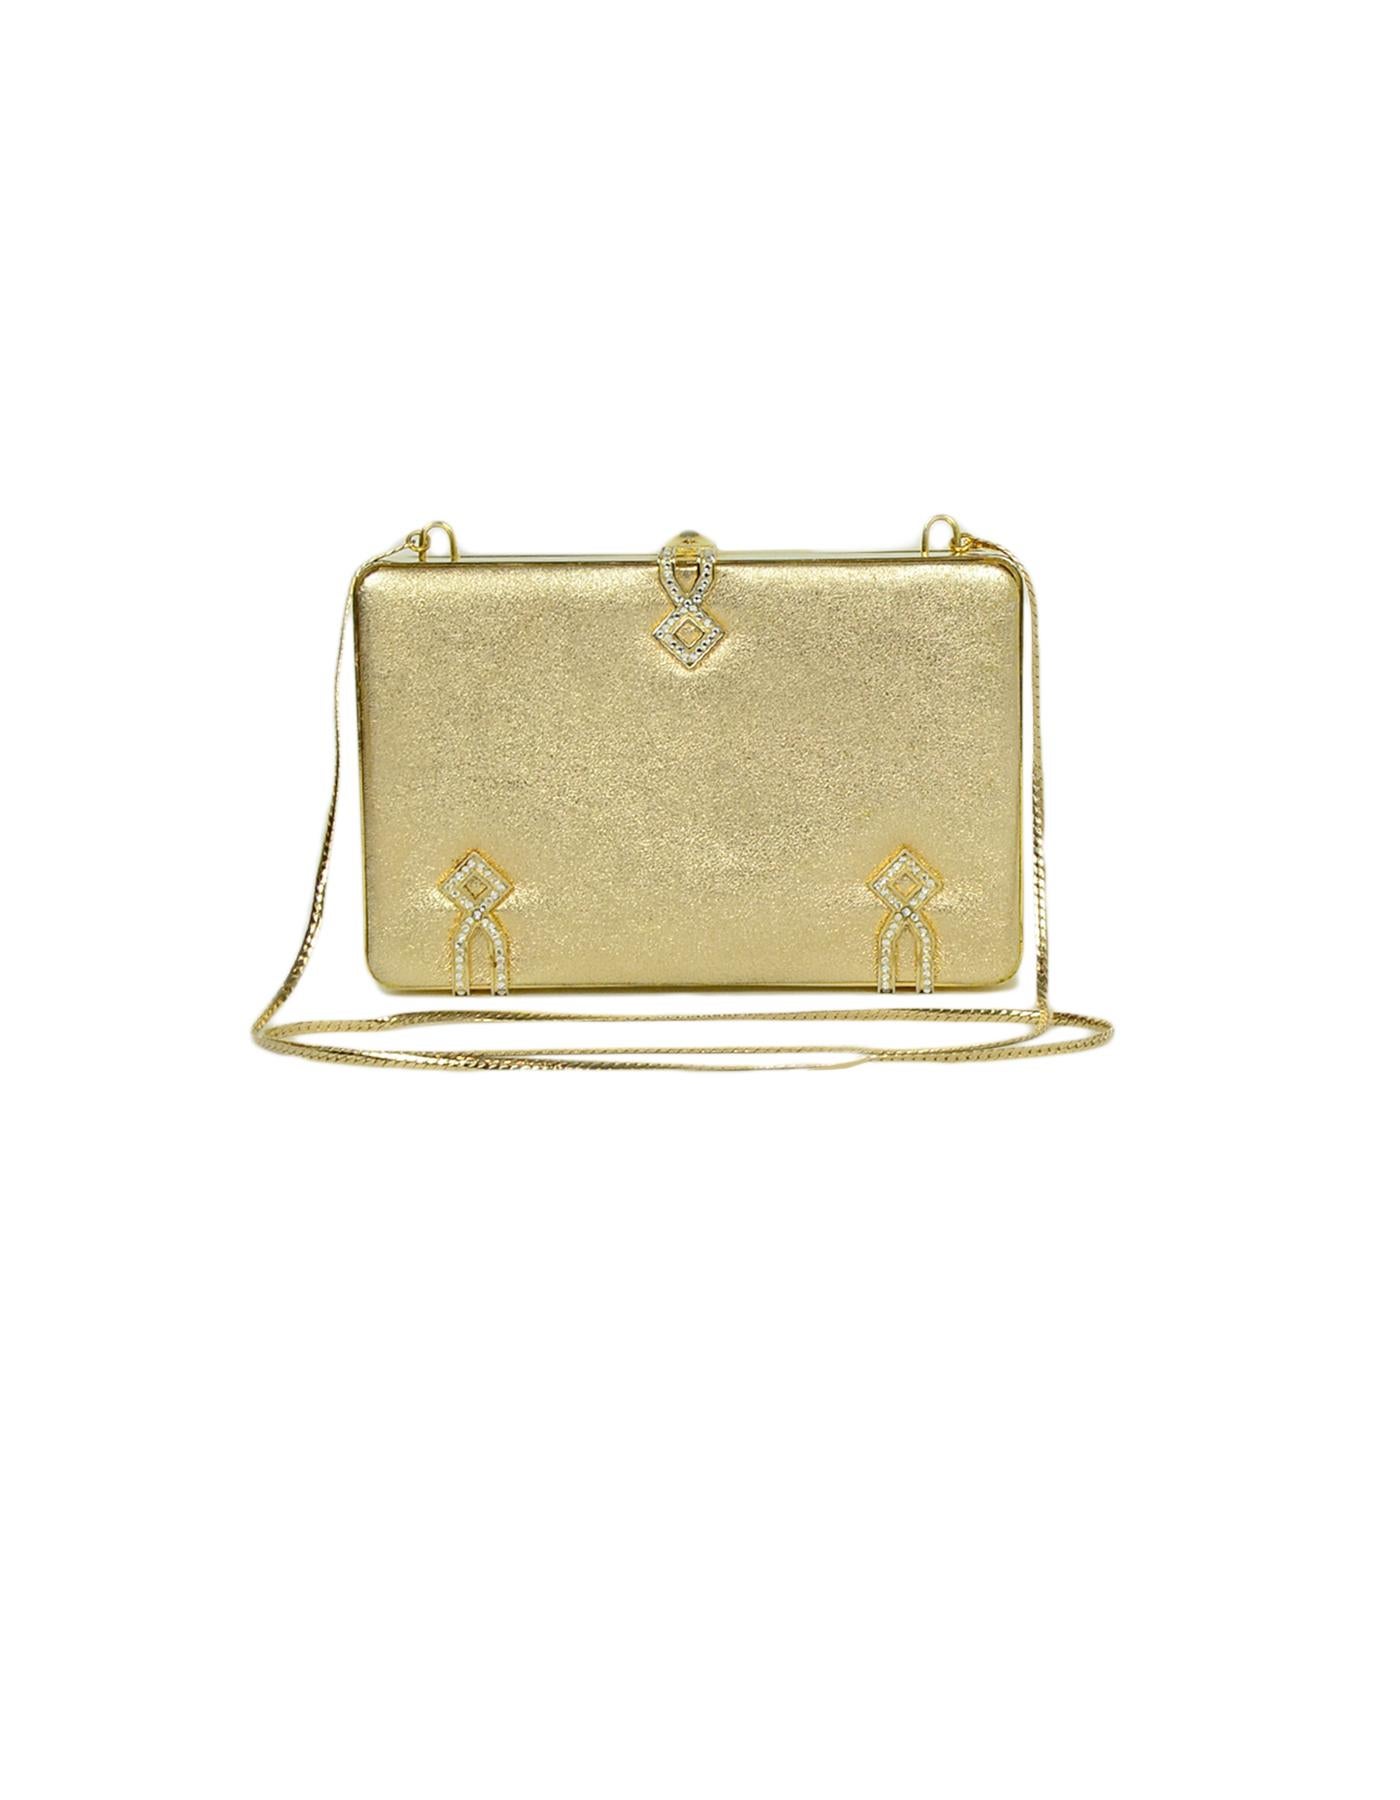 Judith Leiber Gold Leather Miniaudiere Bag with Chain Strap and Crystal Detail In Excellent Condition In New York, NY